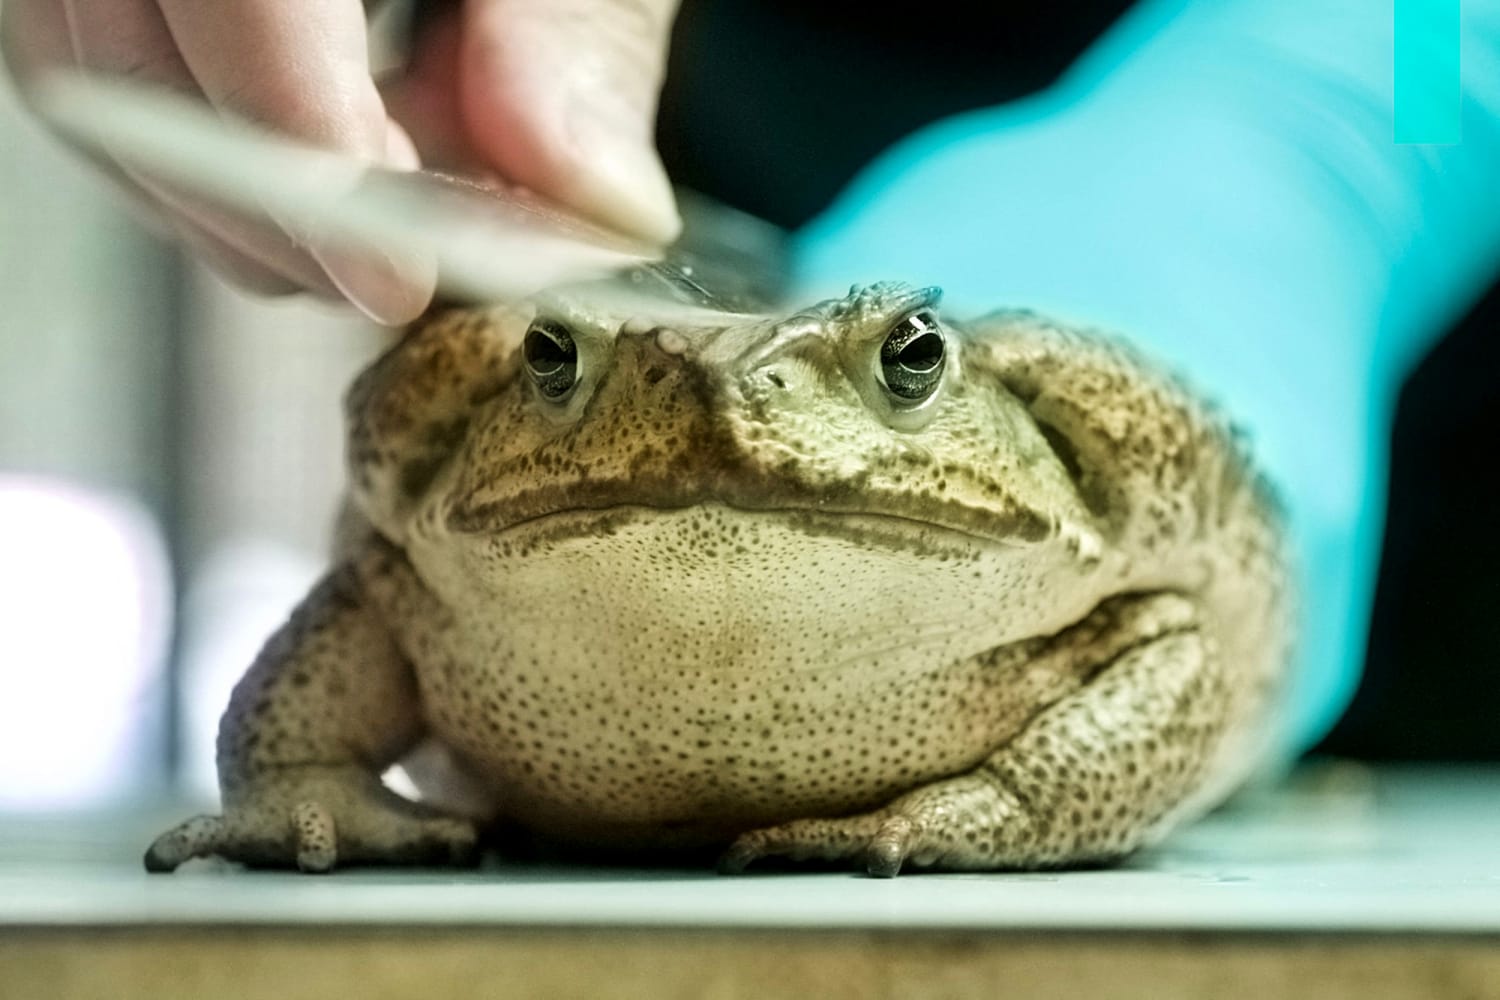 Toxic toads collected by hand in Taiwan to protect pets, wildlife and humans